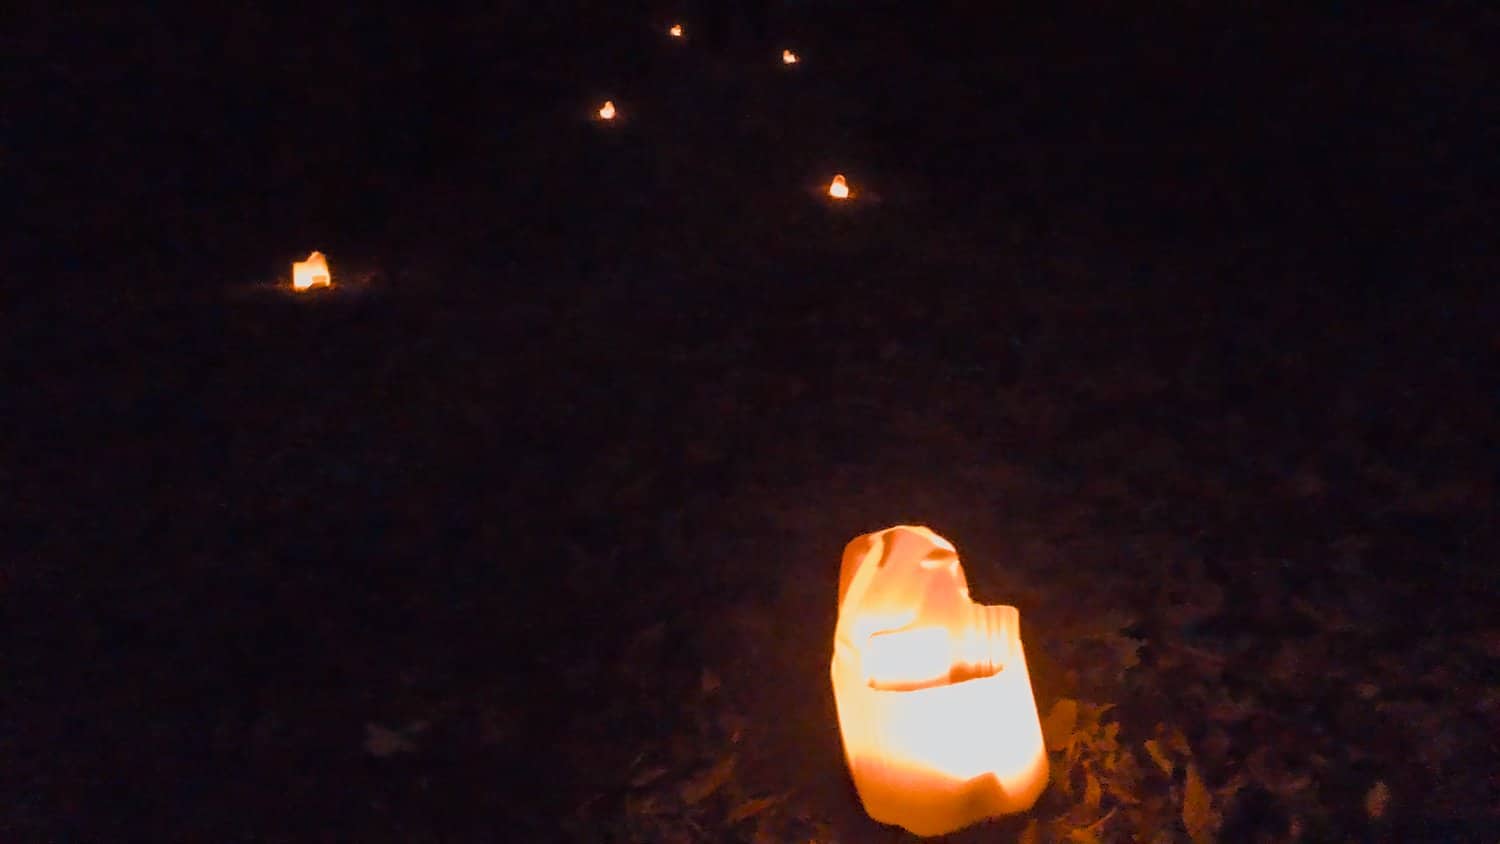 Luminarias leading into the woods.